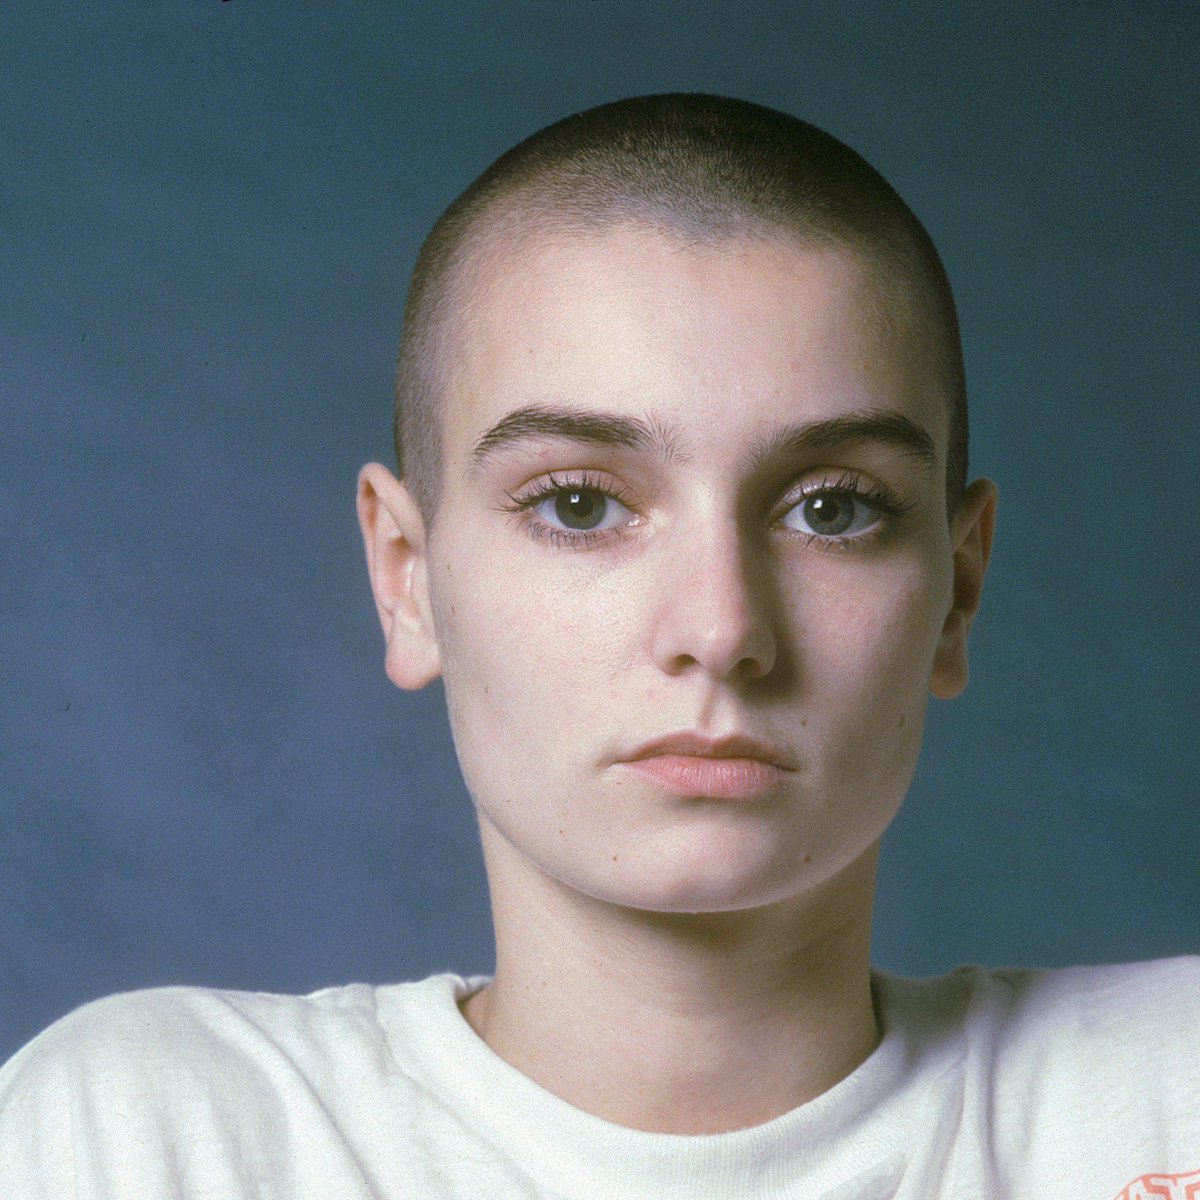 Sinead O’Connor played Gay Pride in 1988, alongside Erasure, just a month after Section 28 had been passed. Pride back then was much more of a protest, lesbians and gays were treated as 2nd class citizens. Performing at Pride was a sign of allyship, when there were few to be had.